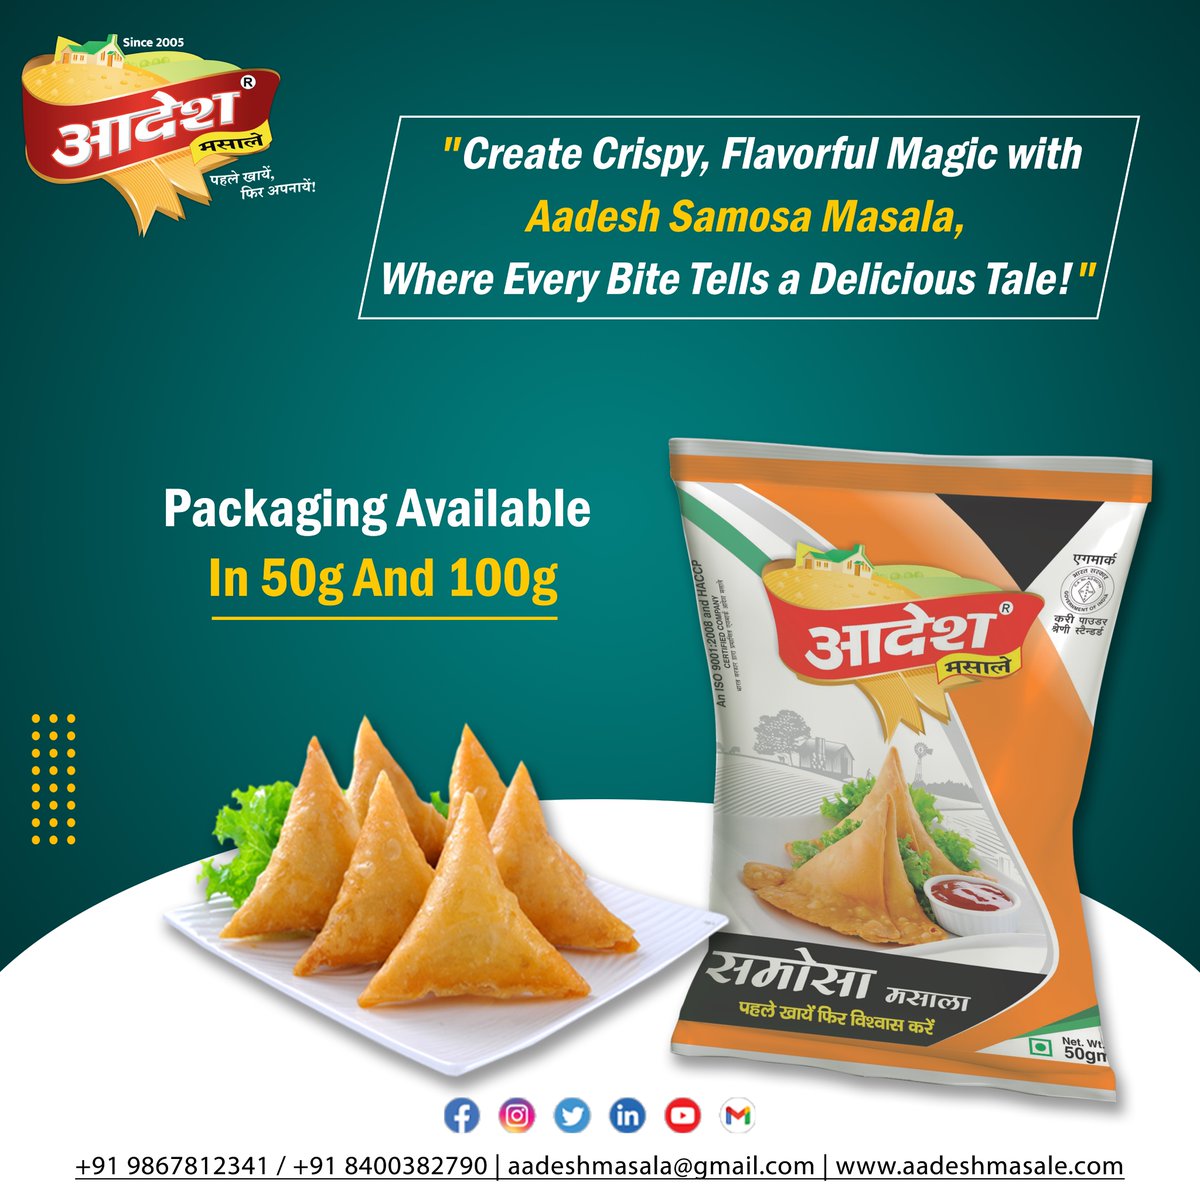 'Create Crispy, Flavorful Magic with Aadesh Samosa Masala, Where Every Bite Tells a Delicious Tale!'

#AadeshSamosaMasala #SamosaMasala #AadeshMasale #healthy #masala #indianfood #foodie #spices #instafood #spicy #cooking #samosa #foodie #food #indianfood #foodblogger #streetfood